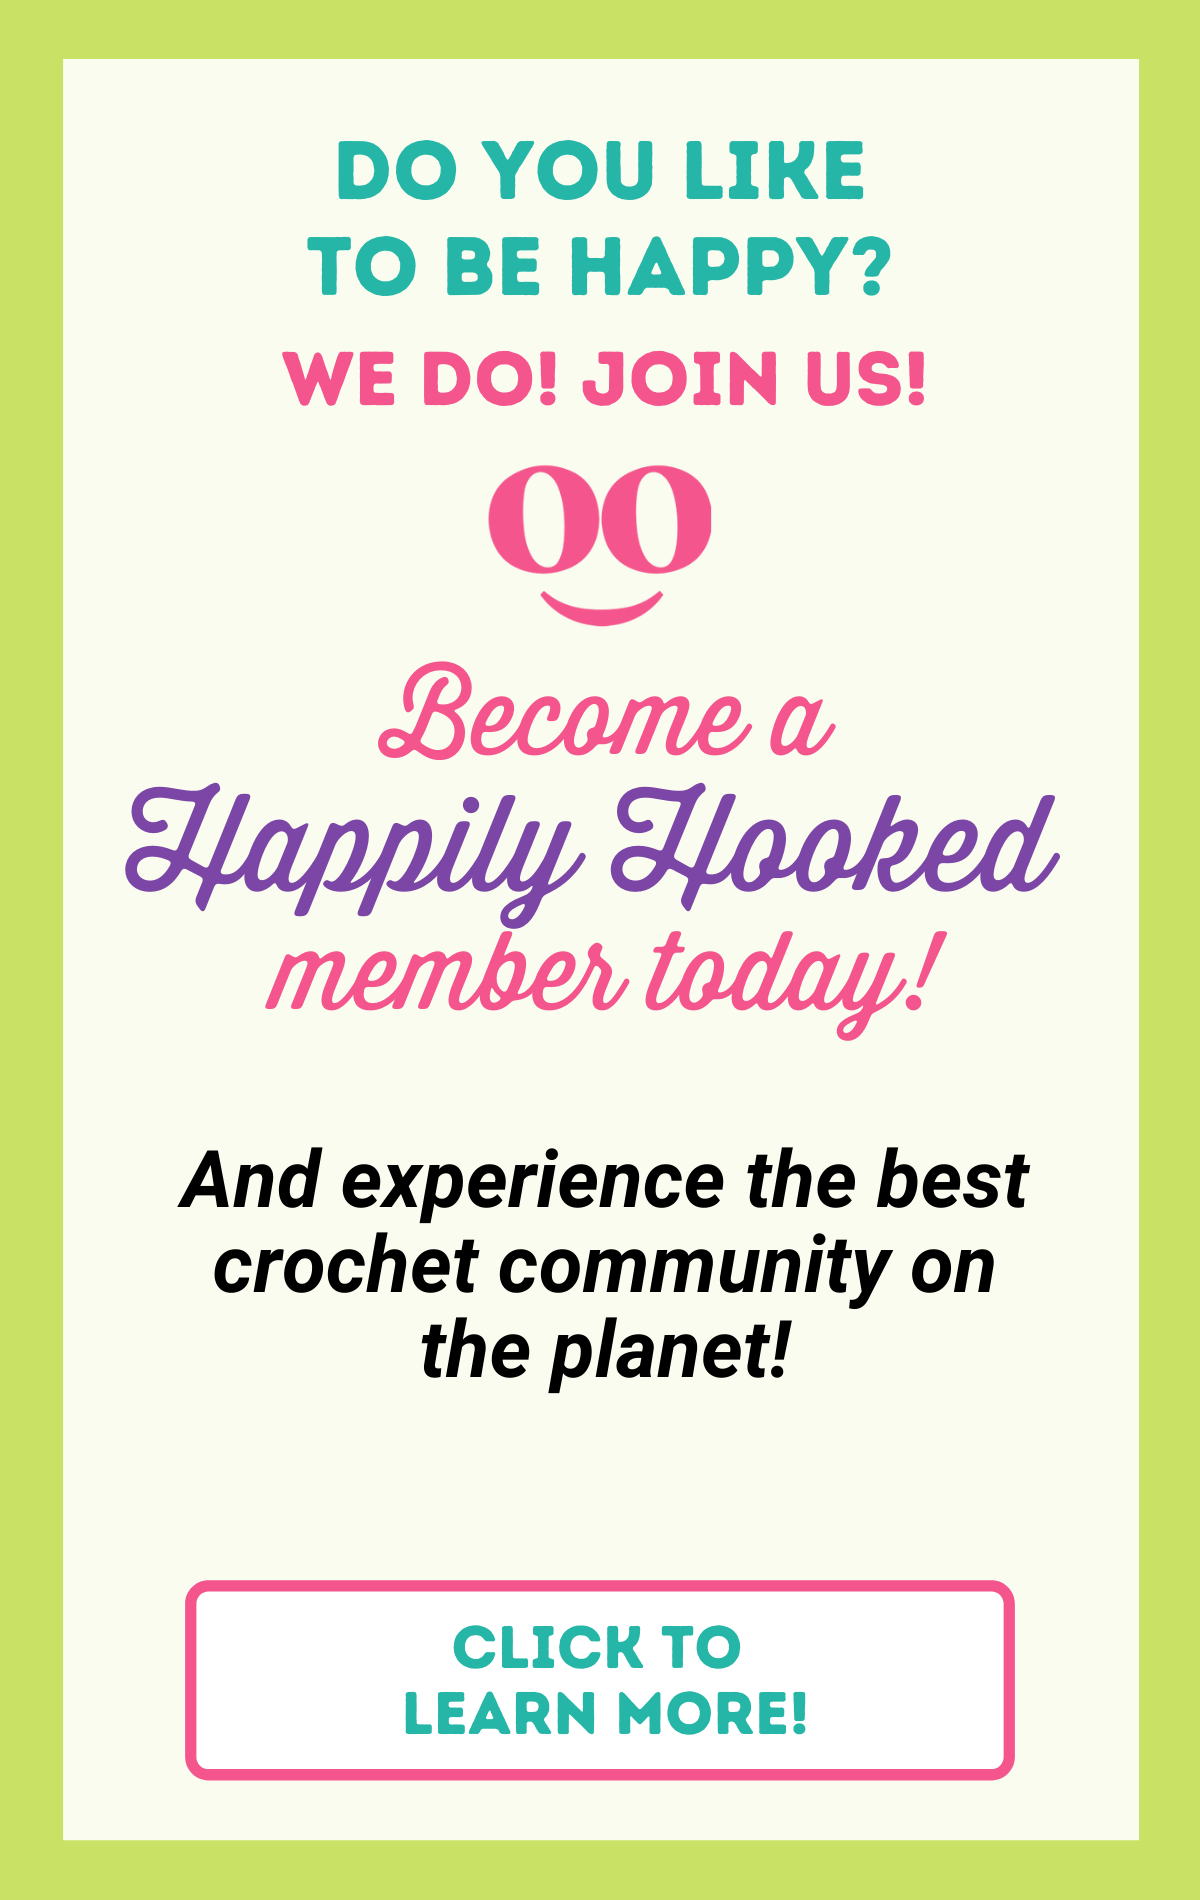 Click to learn more about the best crochet community on the planet